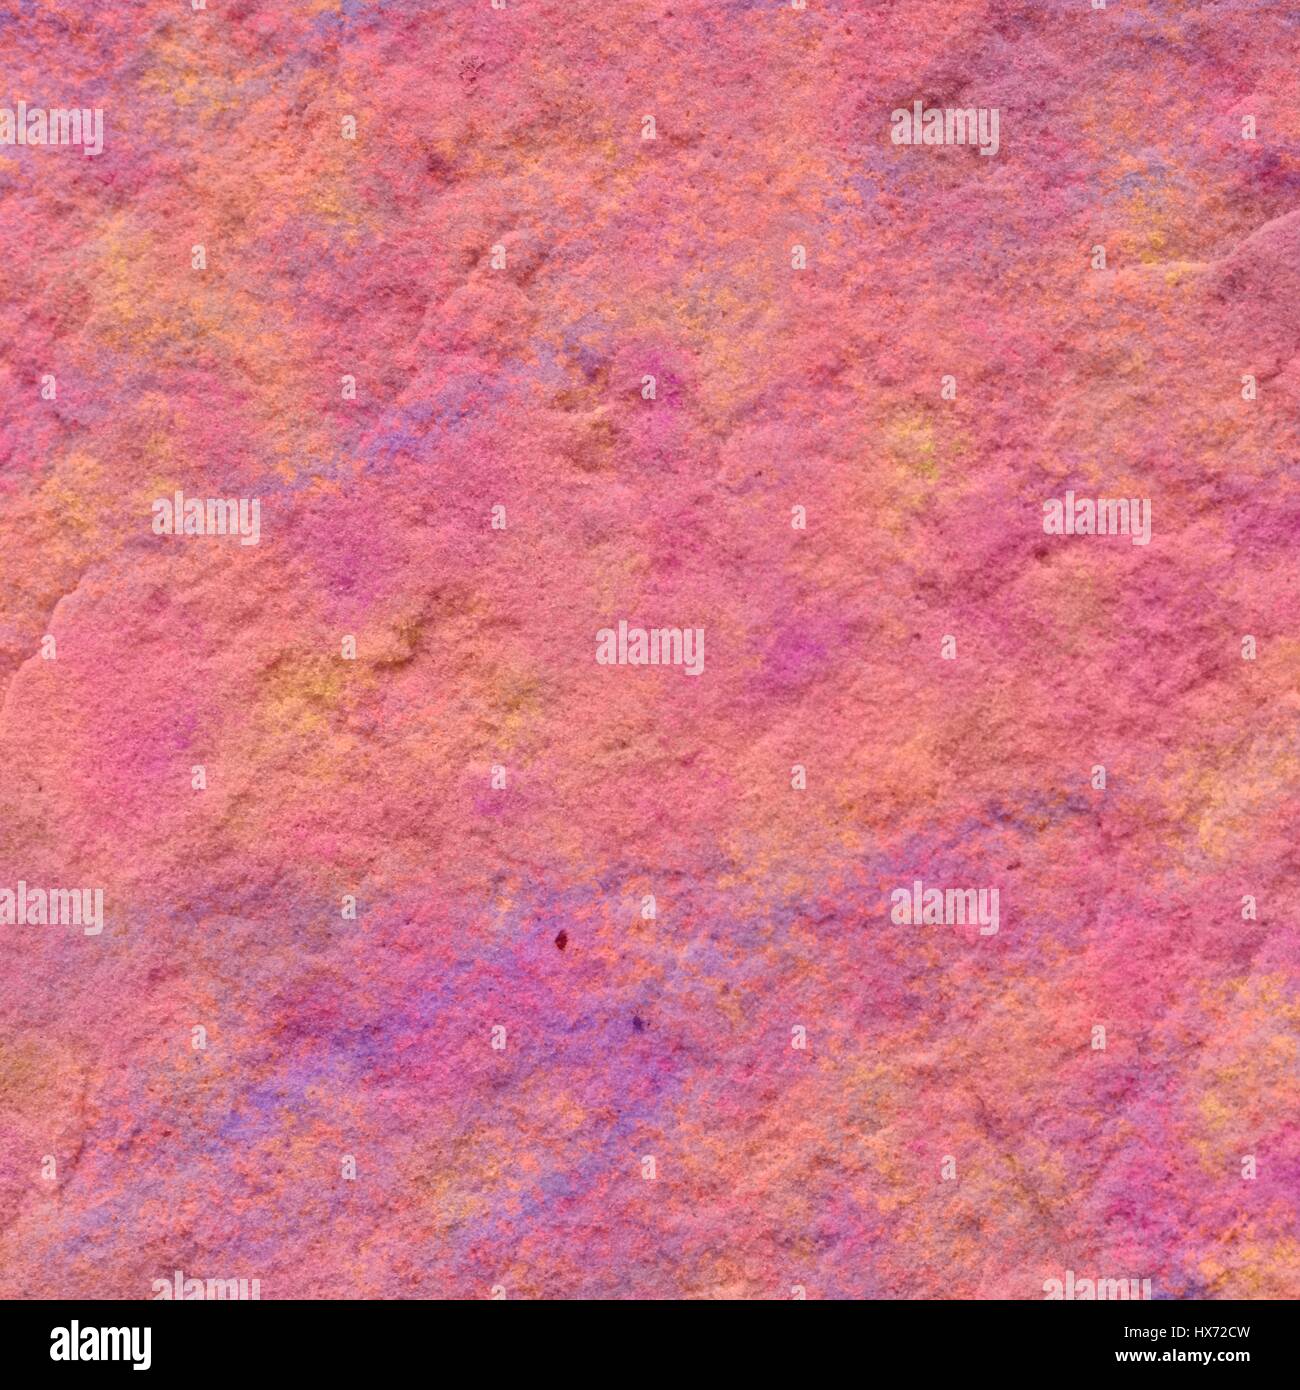 abstract painted stone or rock texture background design Stock Photo